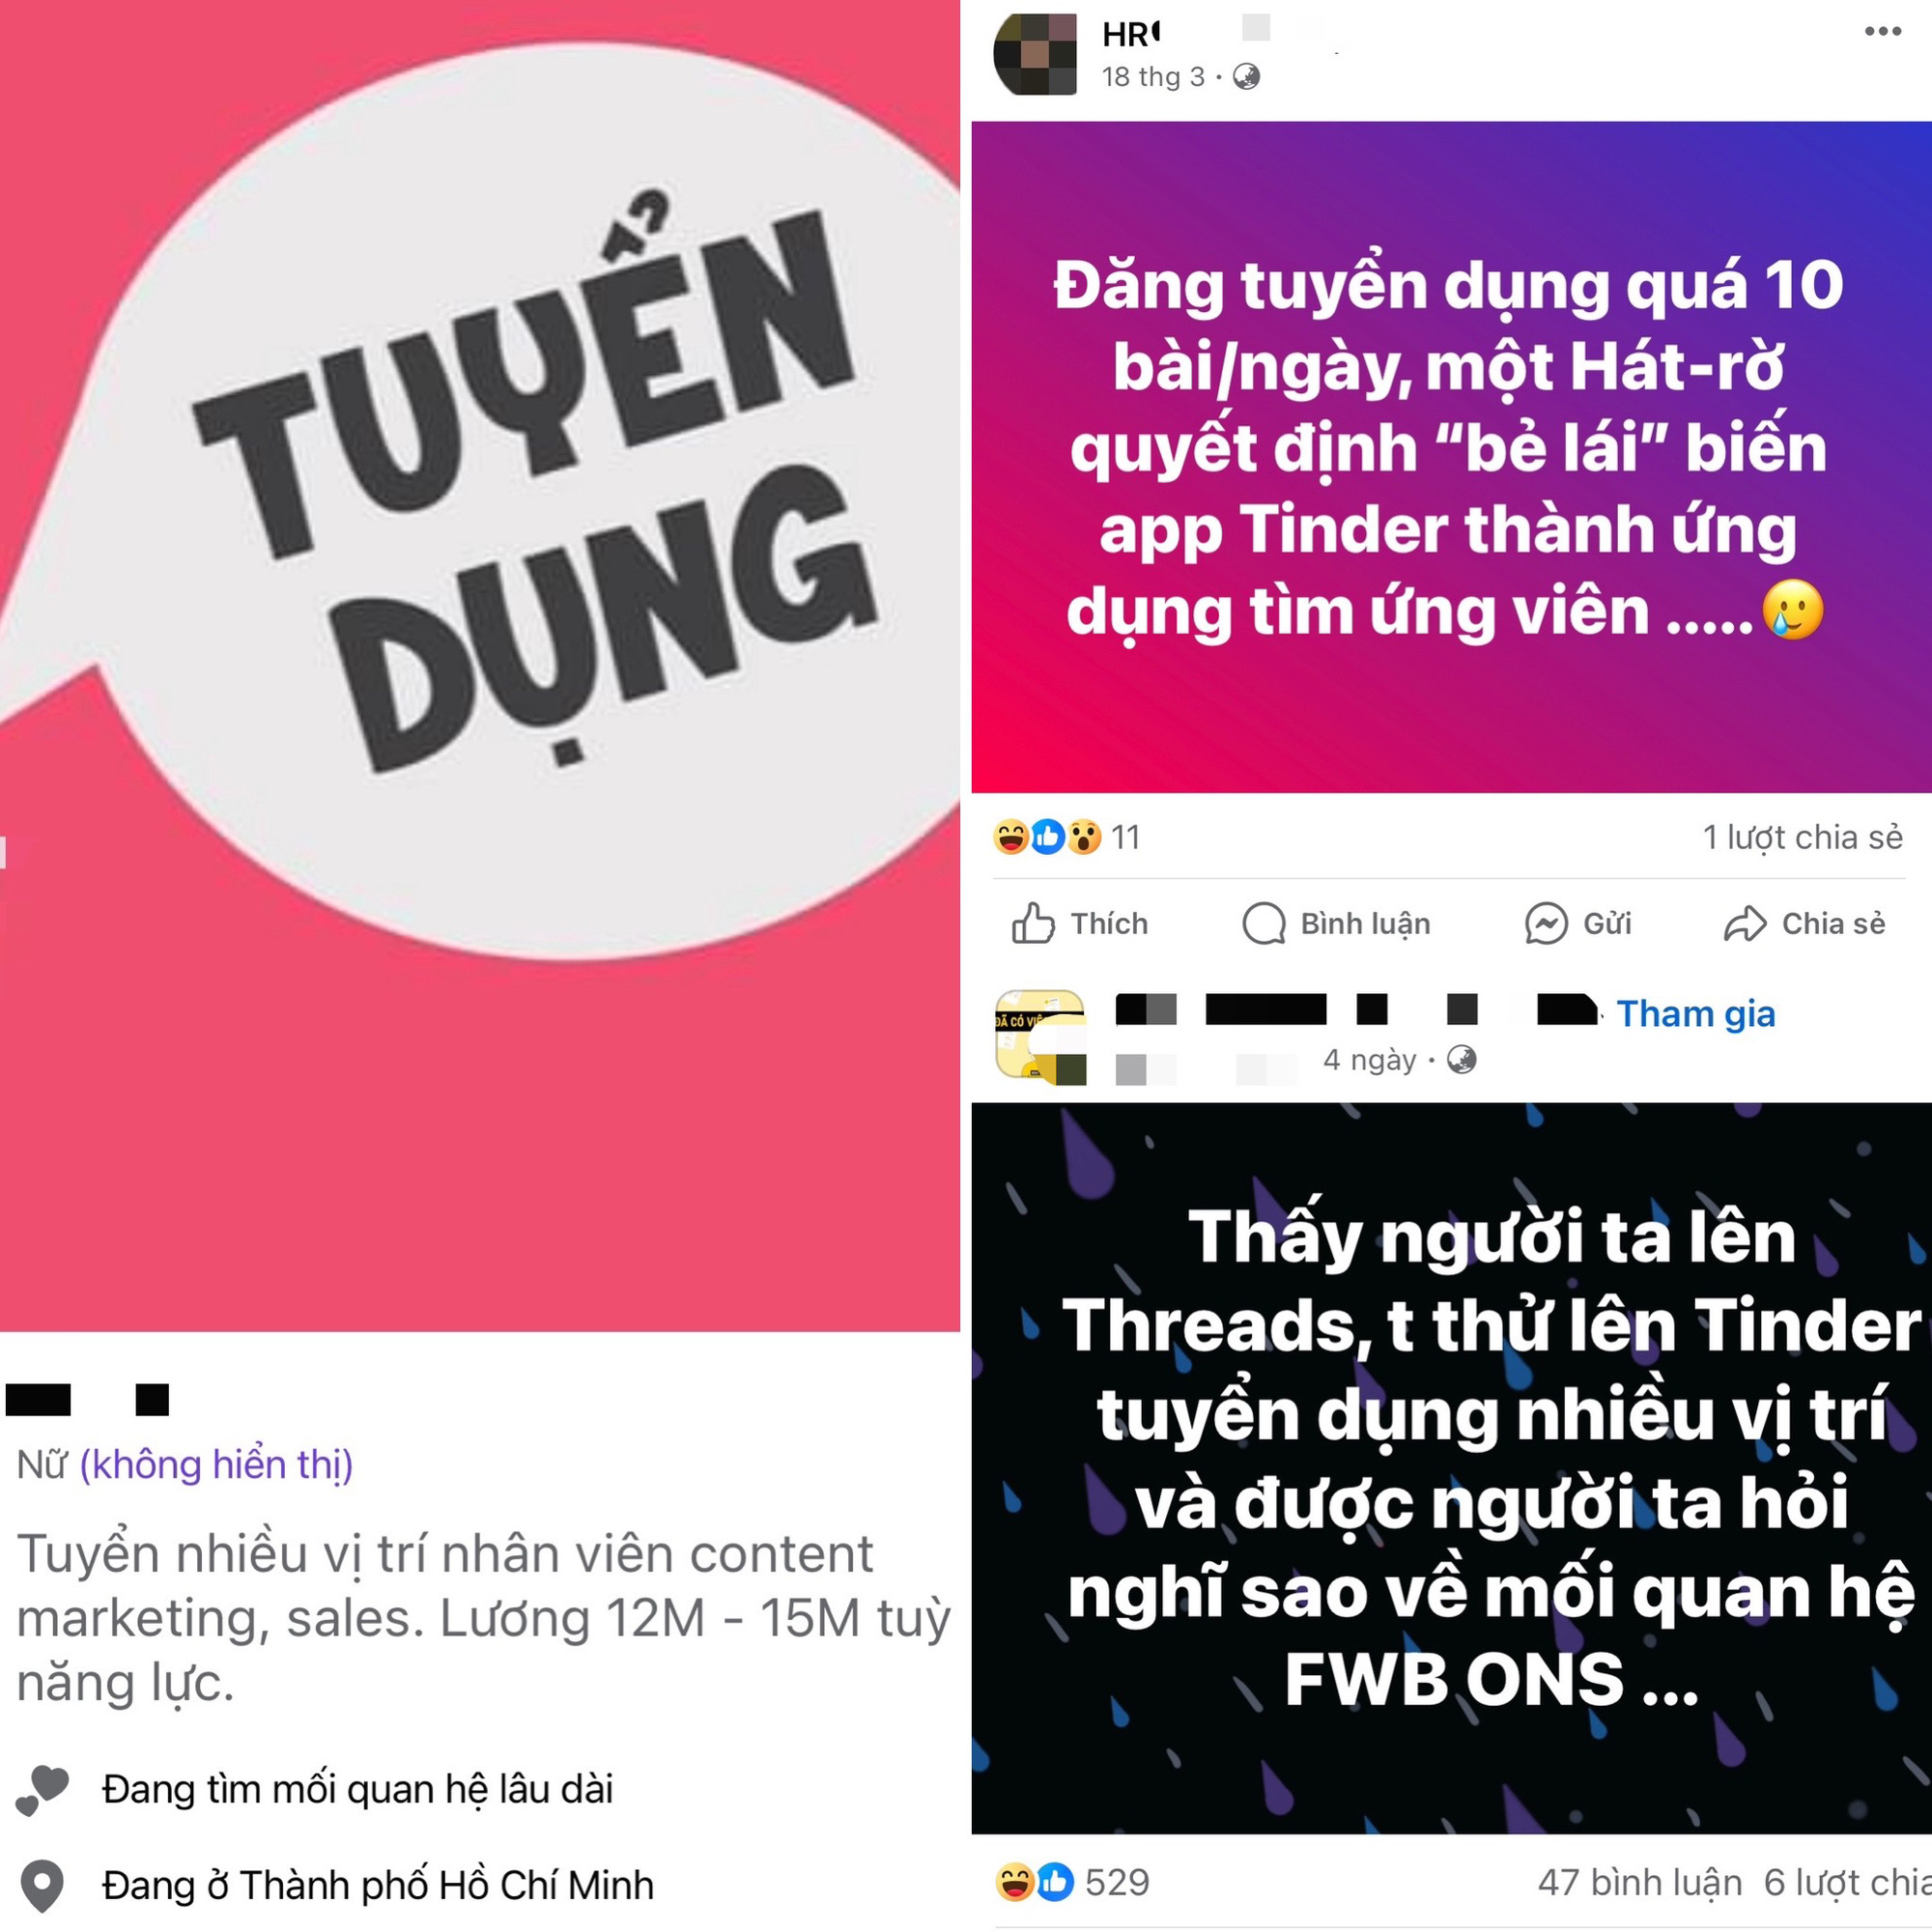 A collage of screenshots of recruitment posts circulated on dating apps in Vietnam.